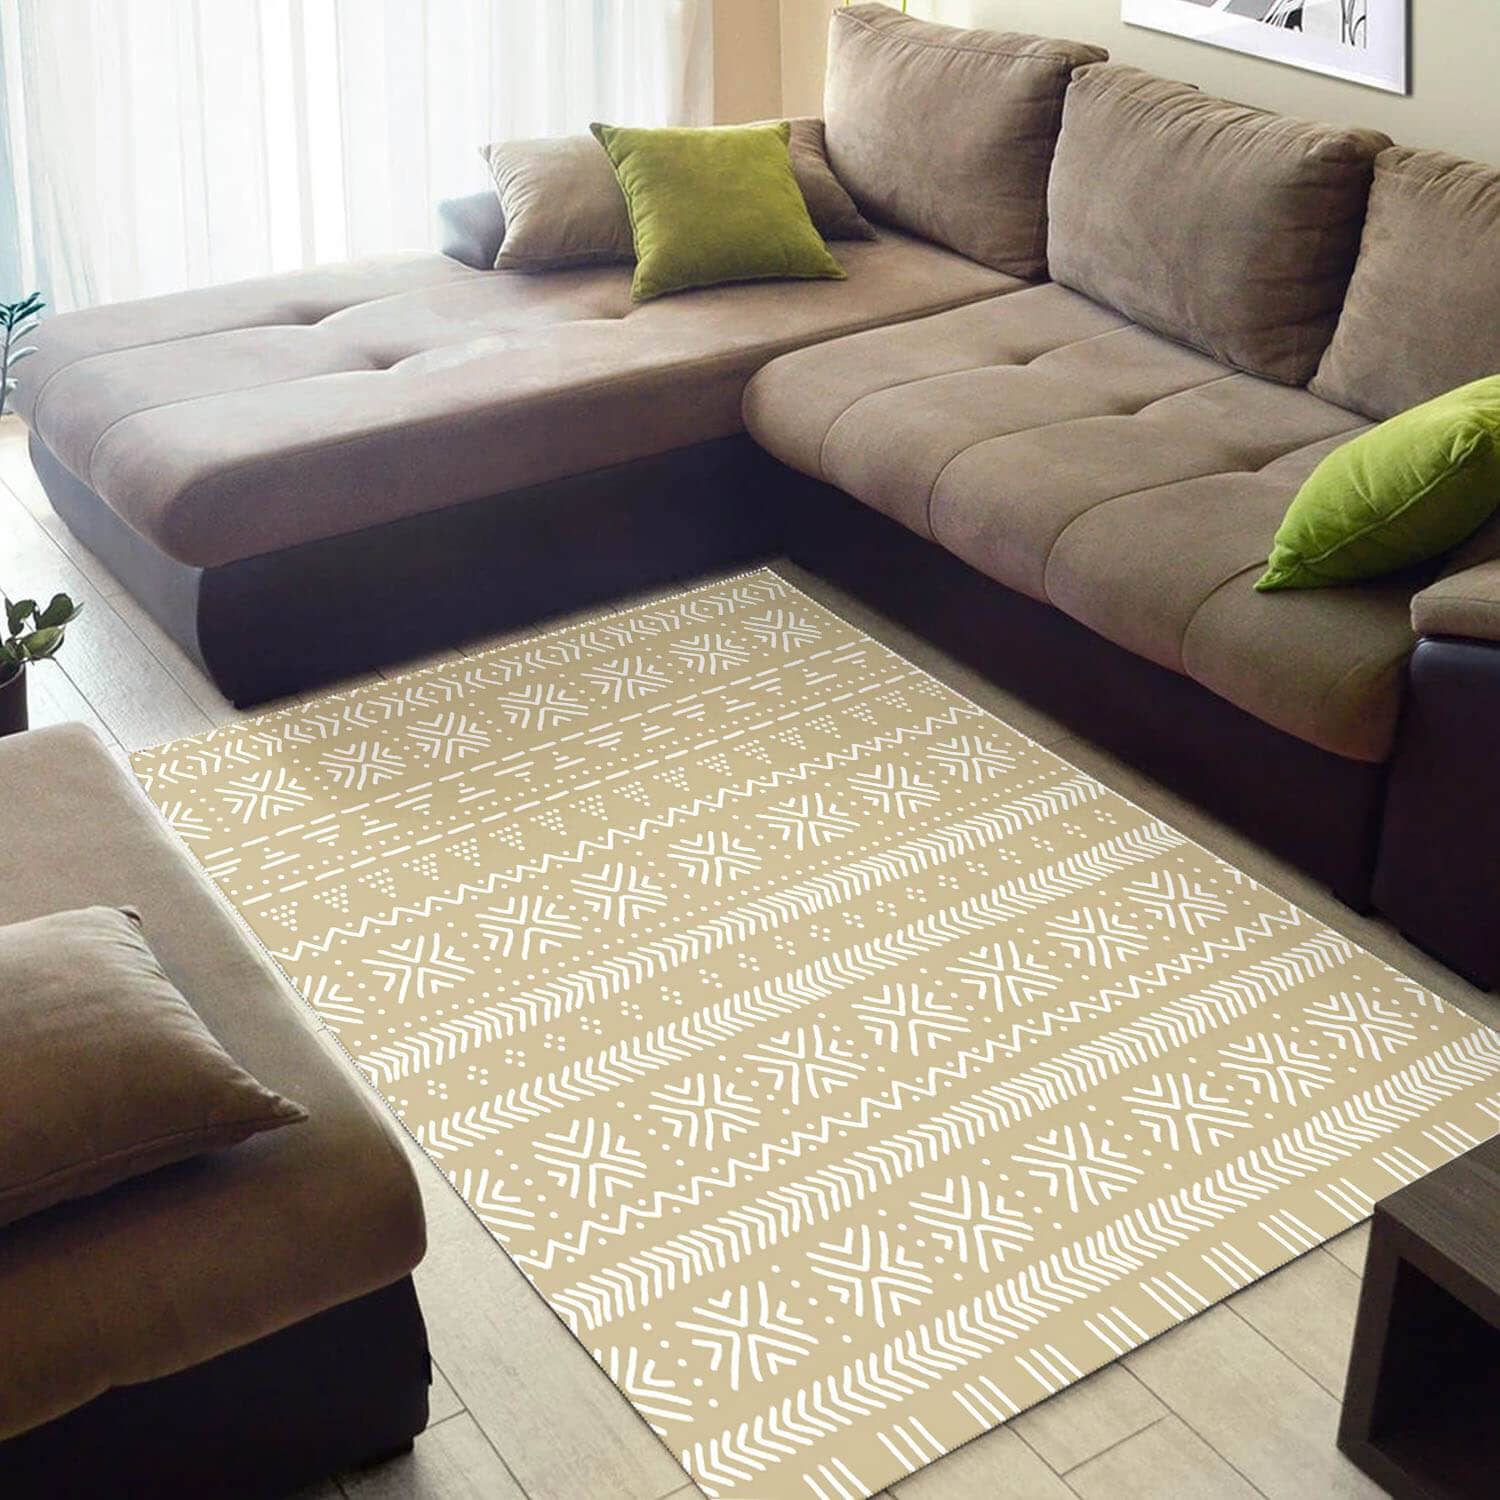 Modern African Style Cute Black History Month Afrocentric Pattern Art Design Floor Carpet Themed Home Rug